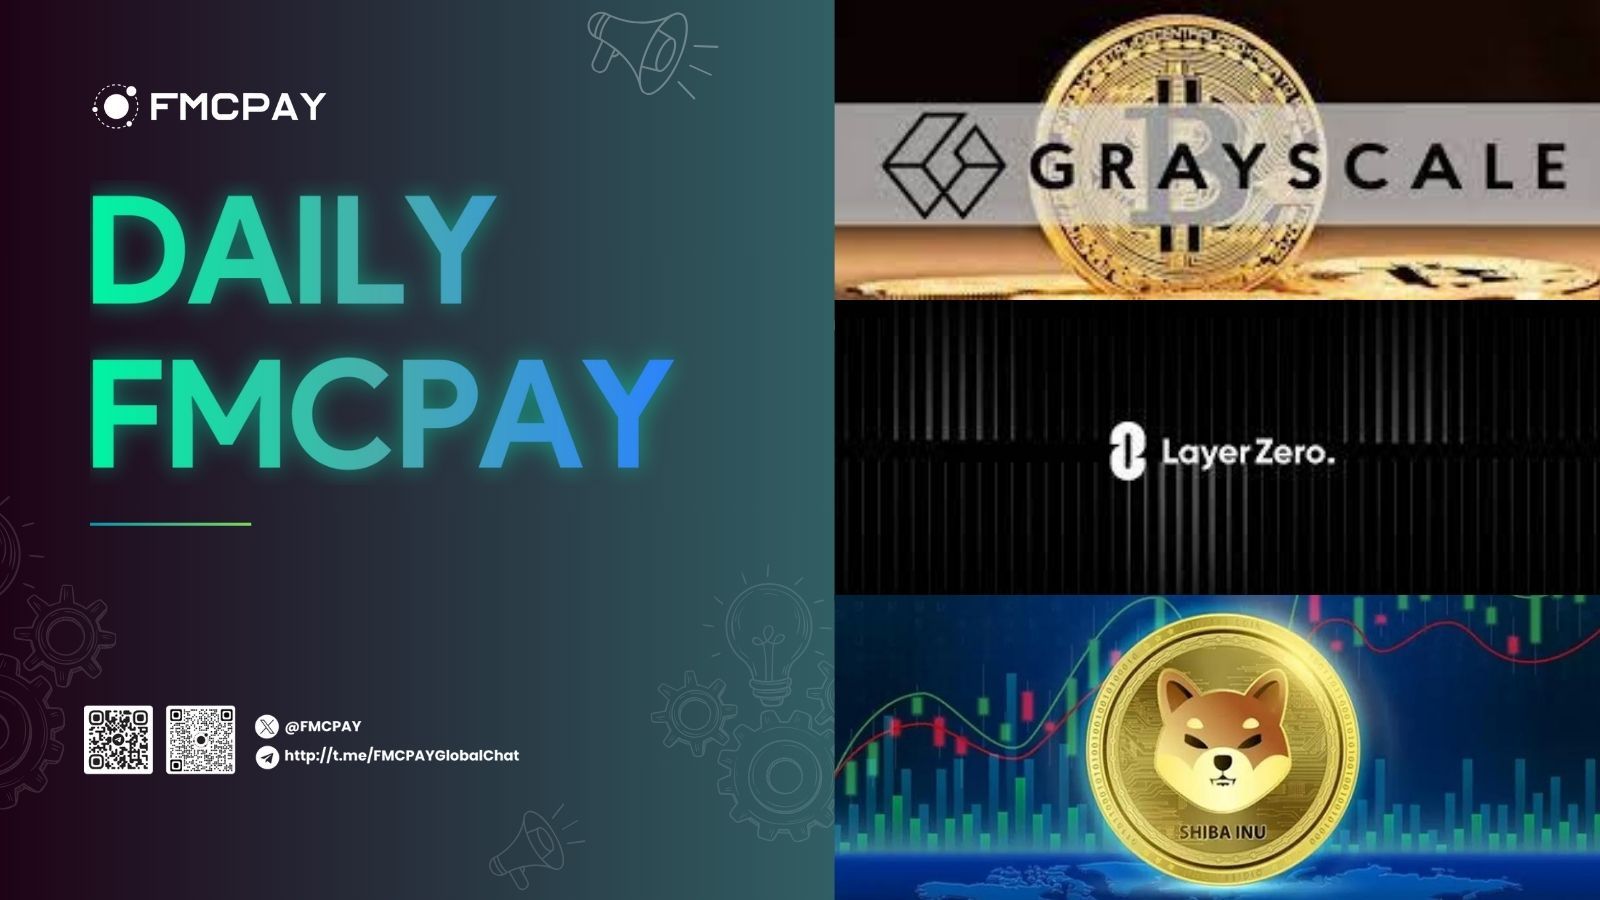 fmcpay the first inflow stops the hemorrhaging of gbtc